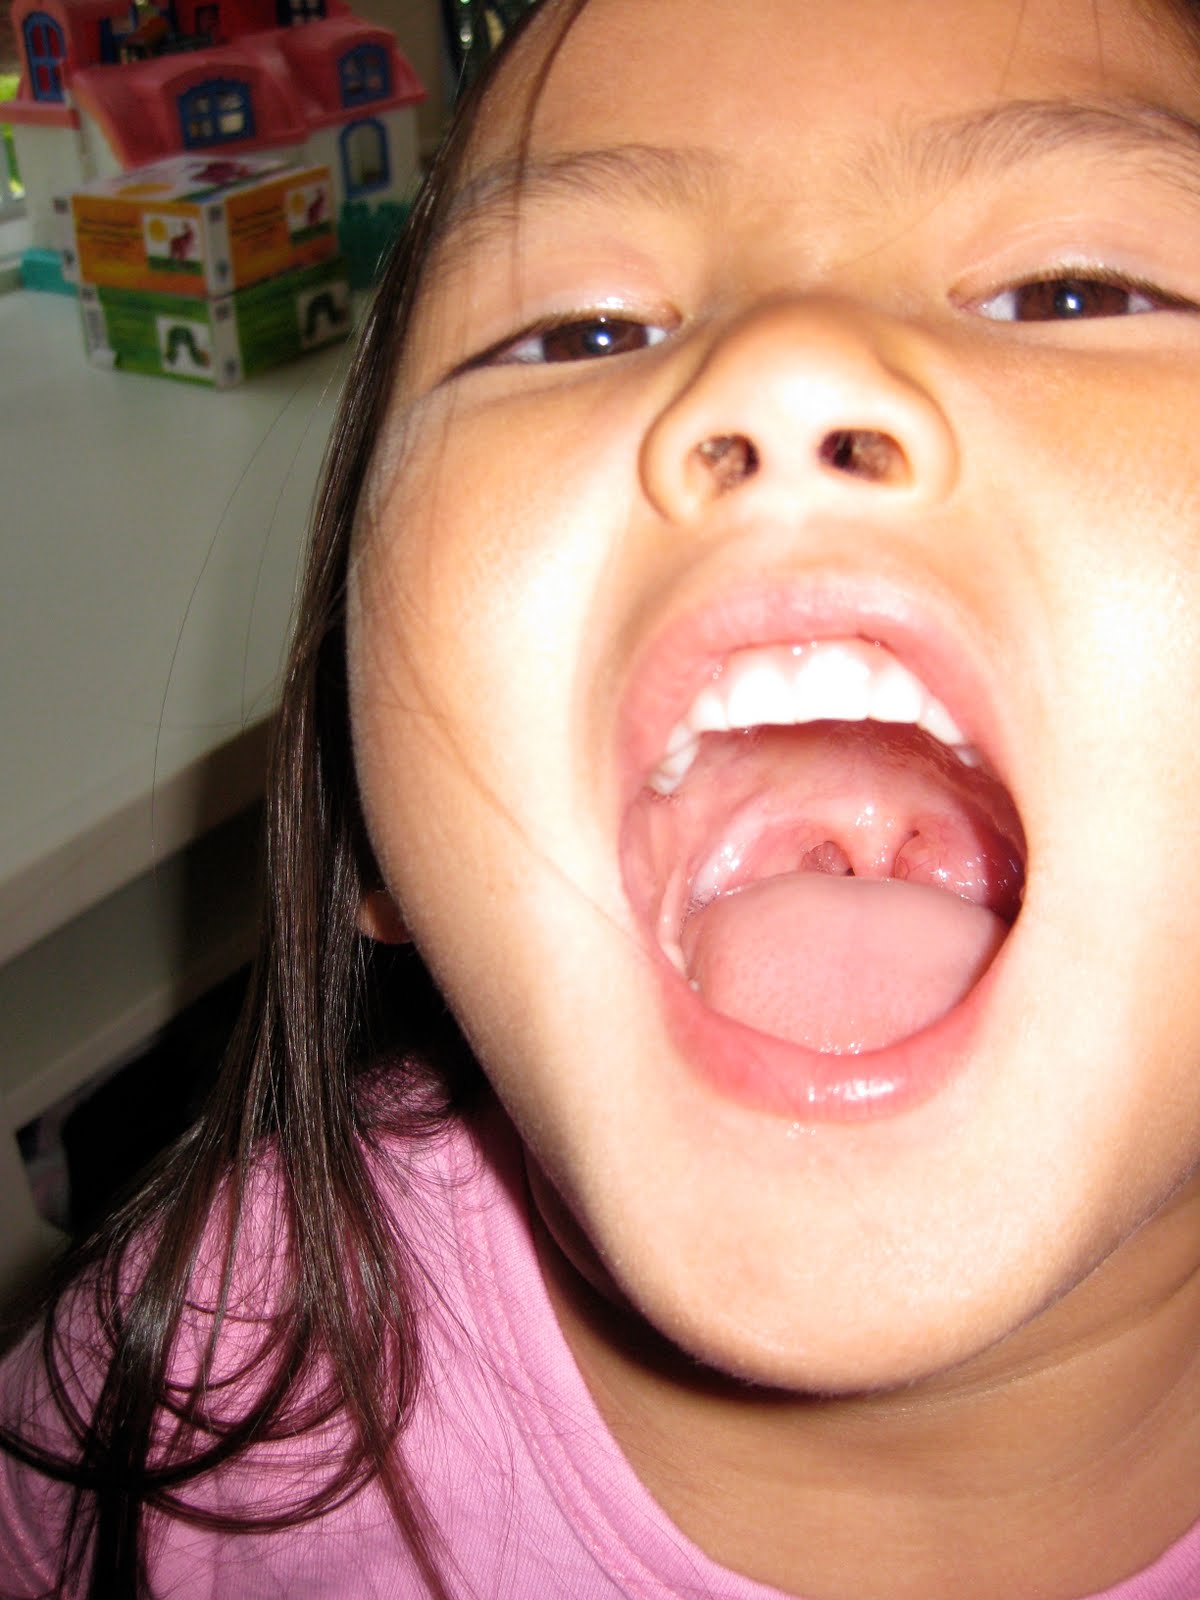 Bronze O. recomended mouth uvula girl